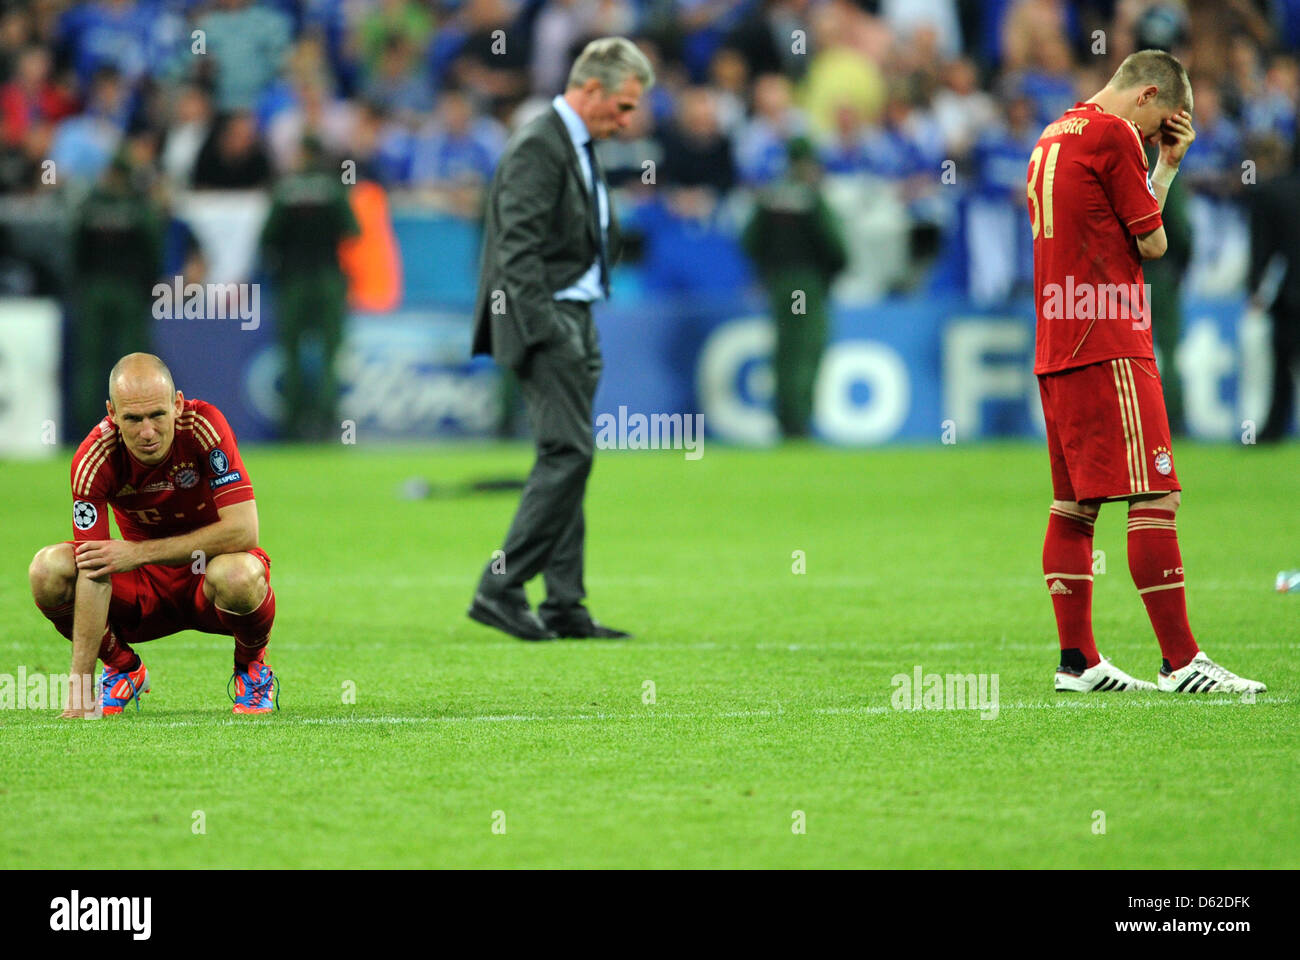 Munich's Arjen Robben (L-R), coach Jupp Heynckes and Bastian Schweinsteiger look dejected after losing the UEFA Champions League soccer final between FC Bayern Munich and FC Chelsea at Fußball Arena München in Munich, Germany, 19 May 2012. Photo: Tobias Hase dpa/lby  +++(c) dpa - Bildfunk+++ Stock Photo